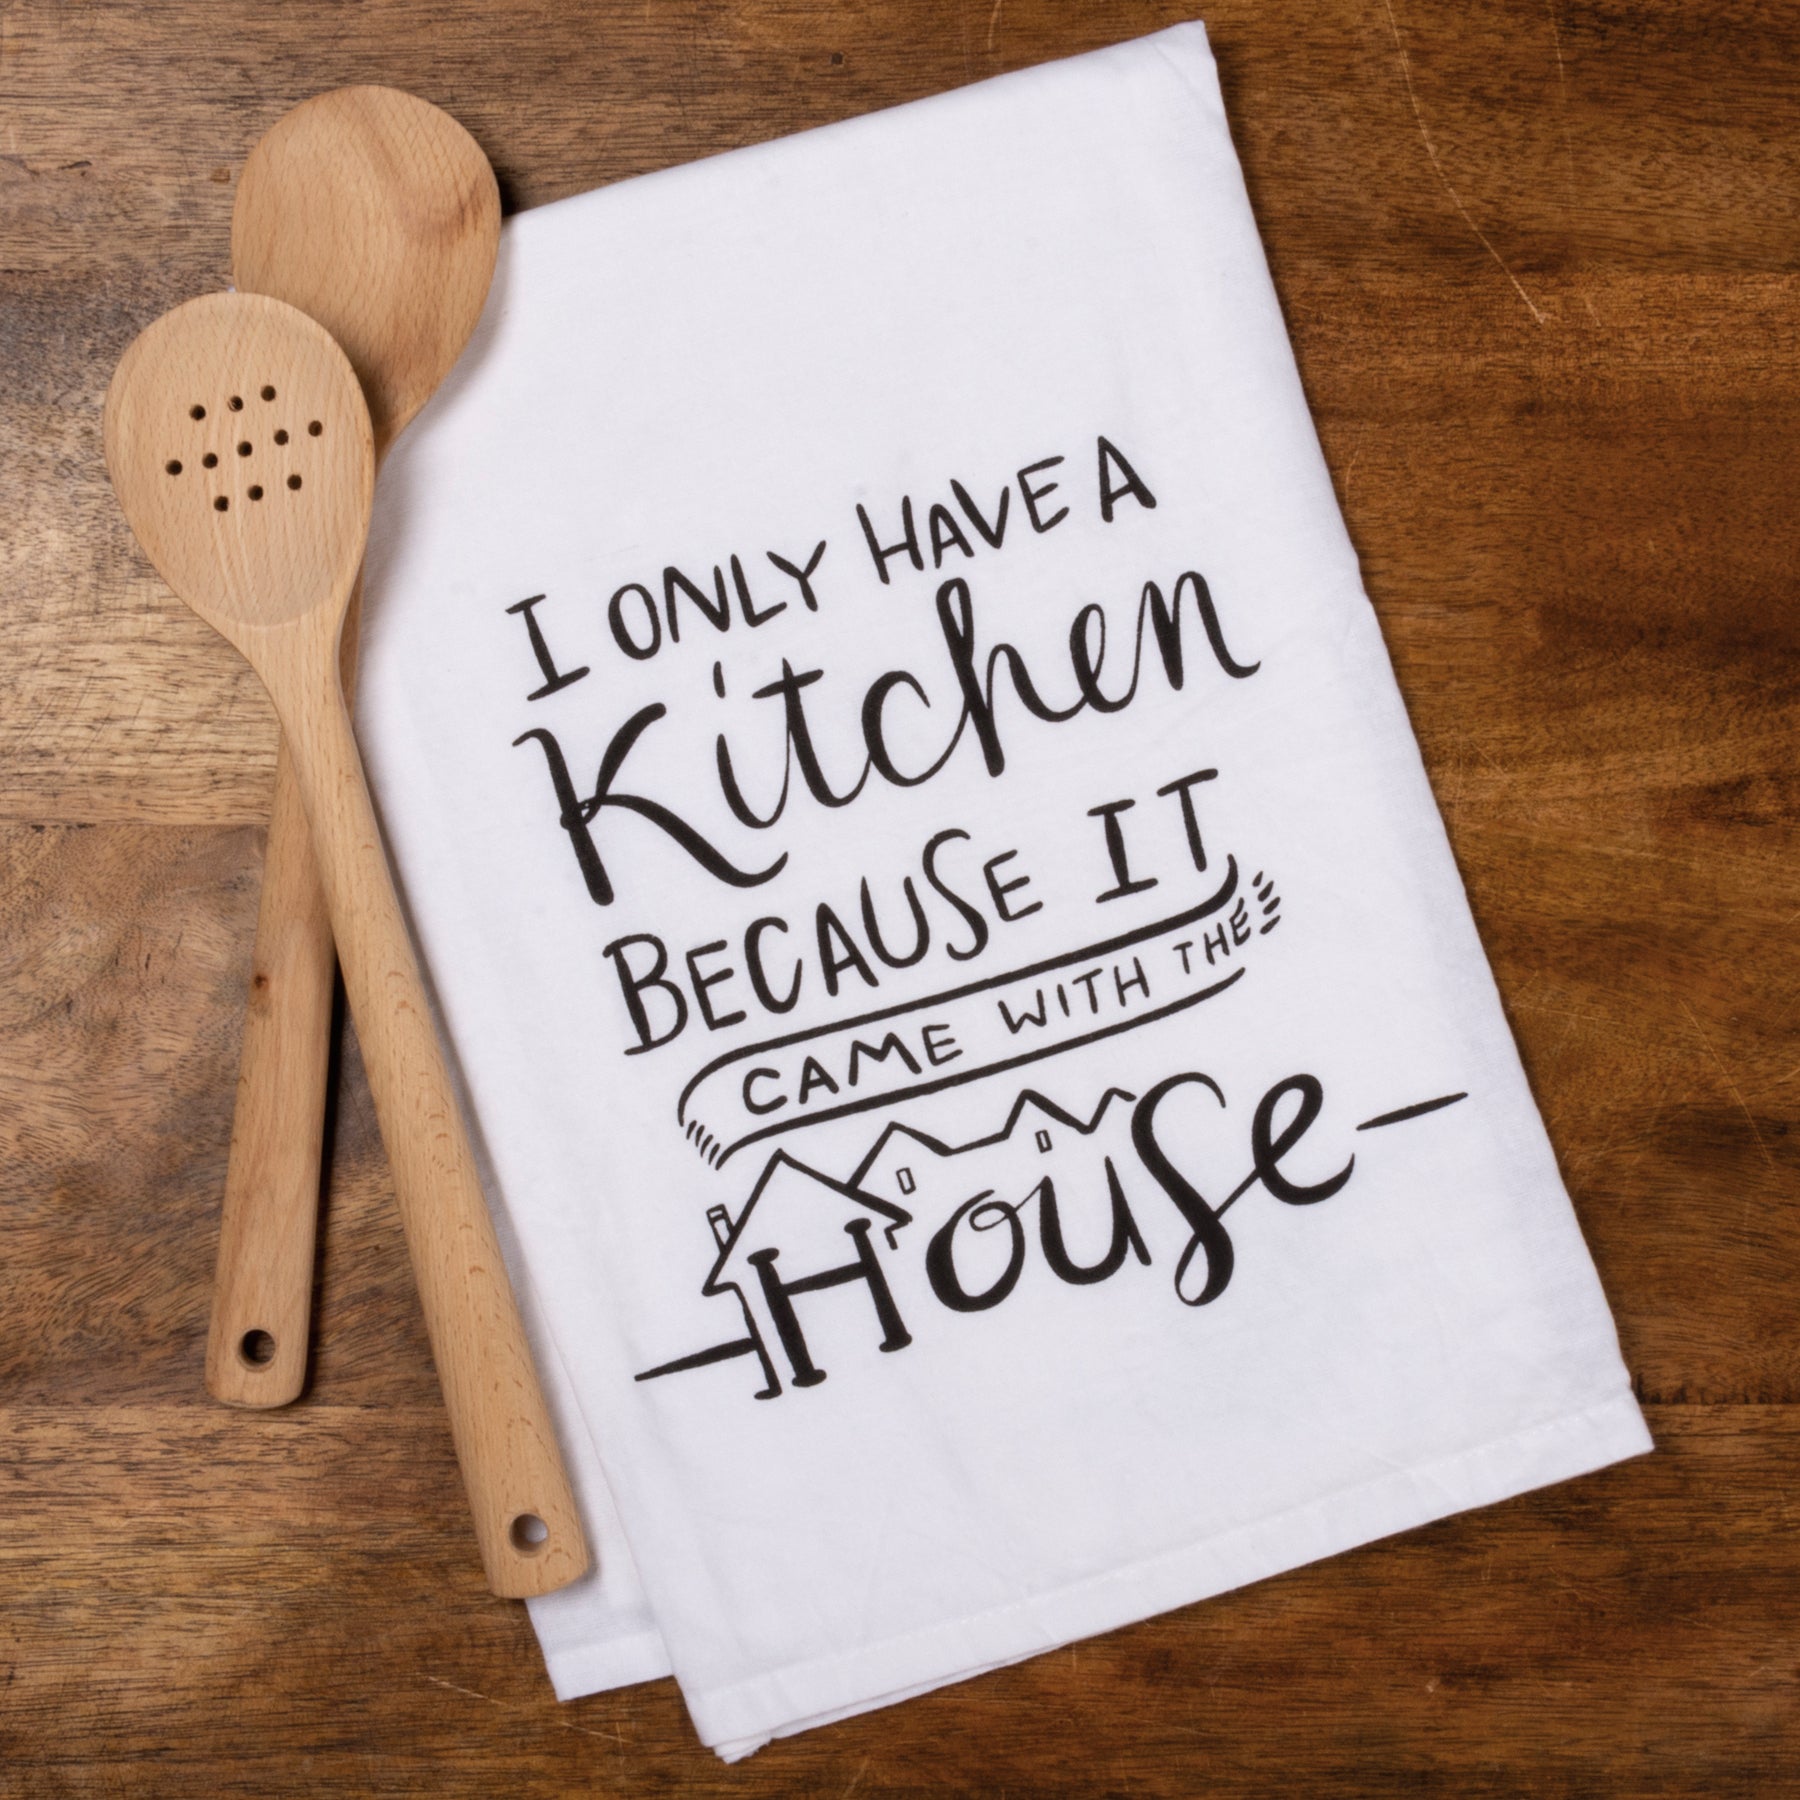 I Only Have A Kitchen Because It Came With The House - Dish Towel